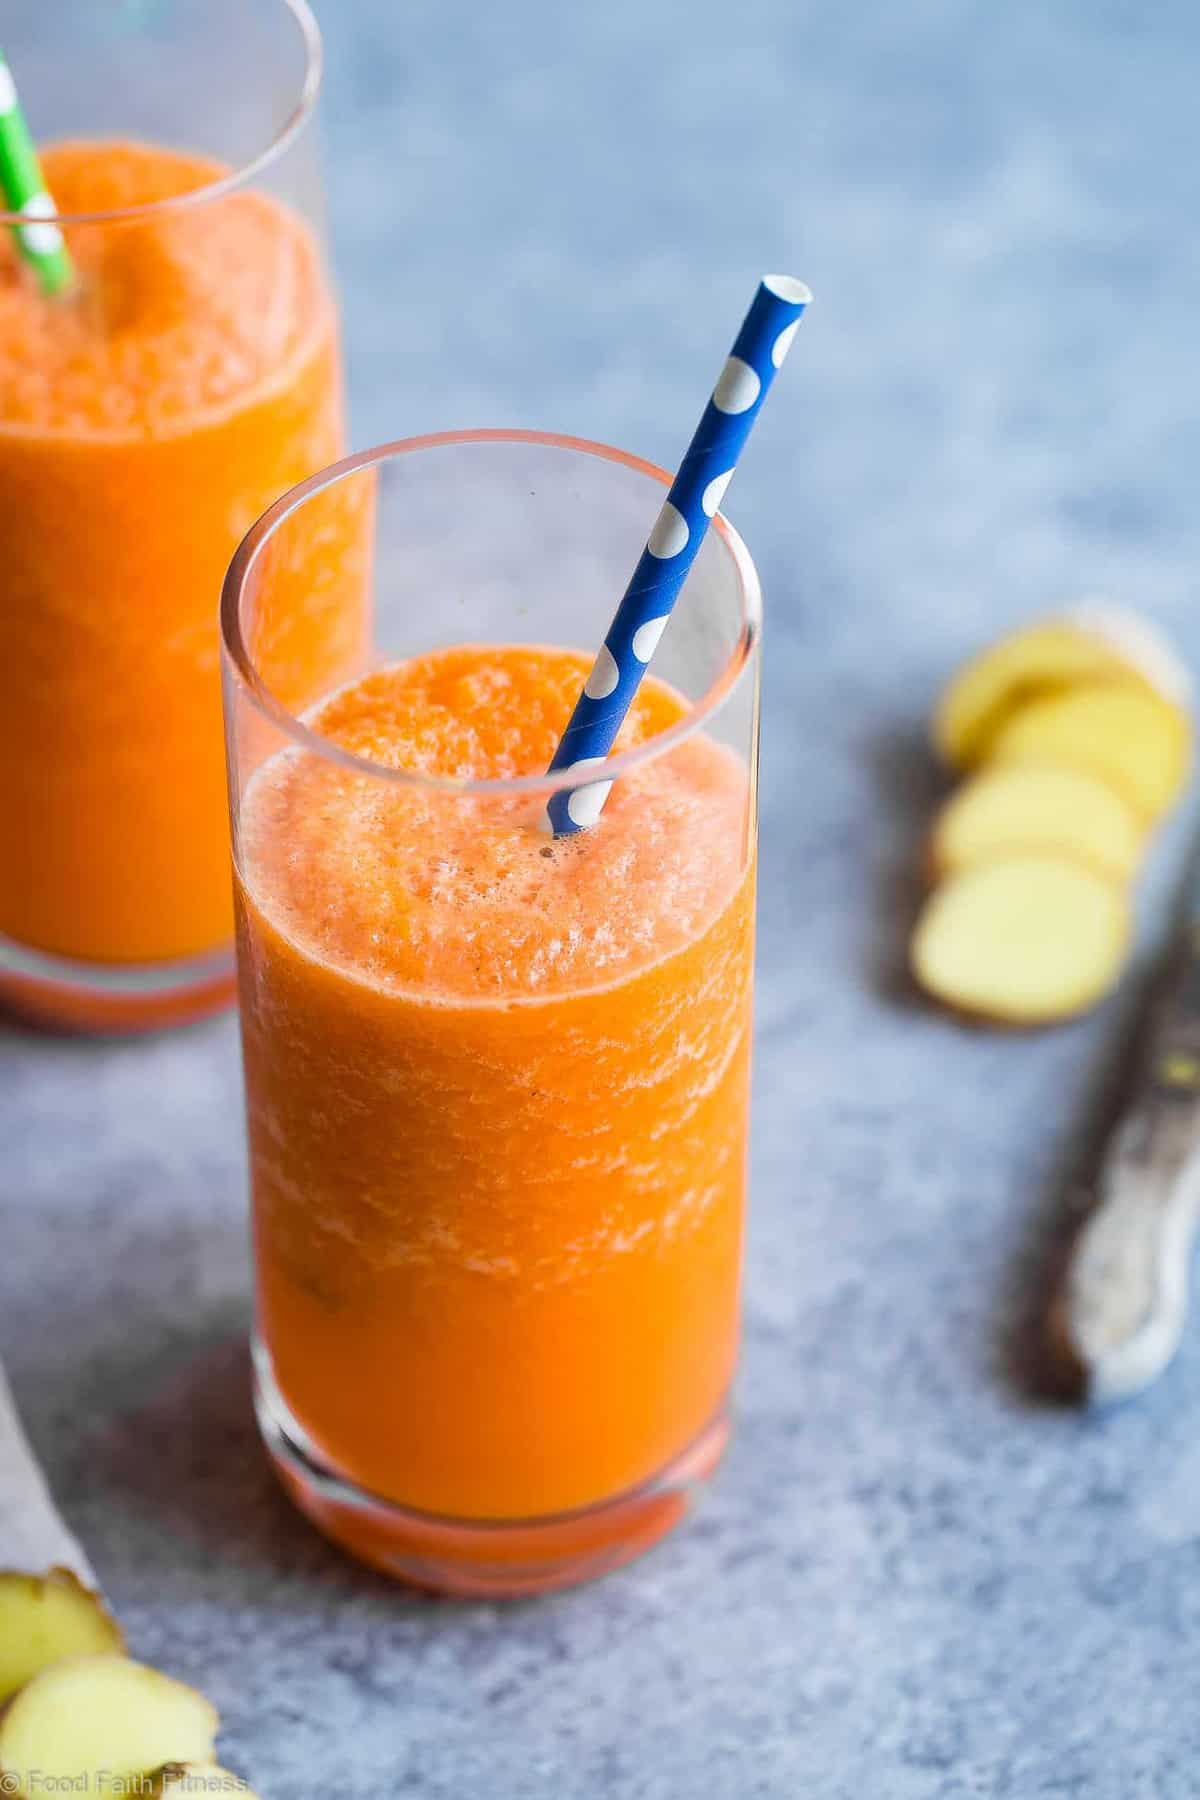 Orange Carrot Smoothie with Ginger - Only 3 ingredients, 100 calories and SO refreshing! A paleo, vegan and whole30 quick breakfast or snack to get you through the day! | #Foodfaithfitness | #Glutenfree #vegan #healthy #paleo #whole30